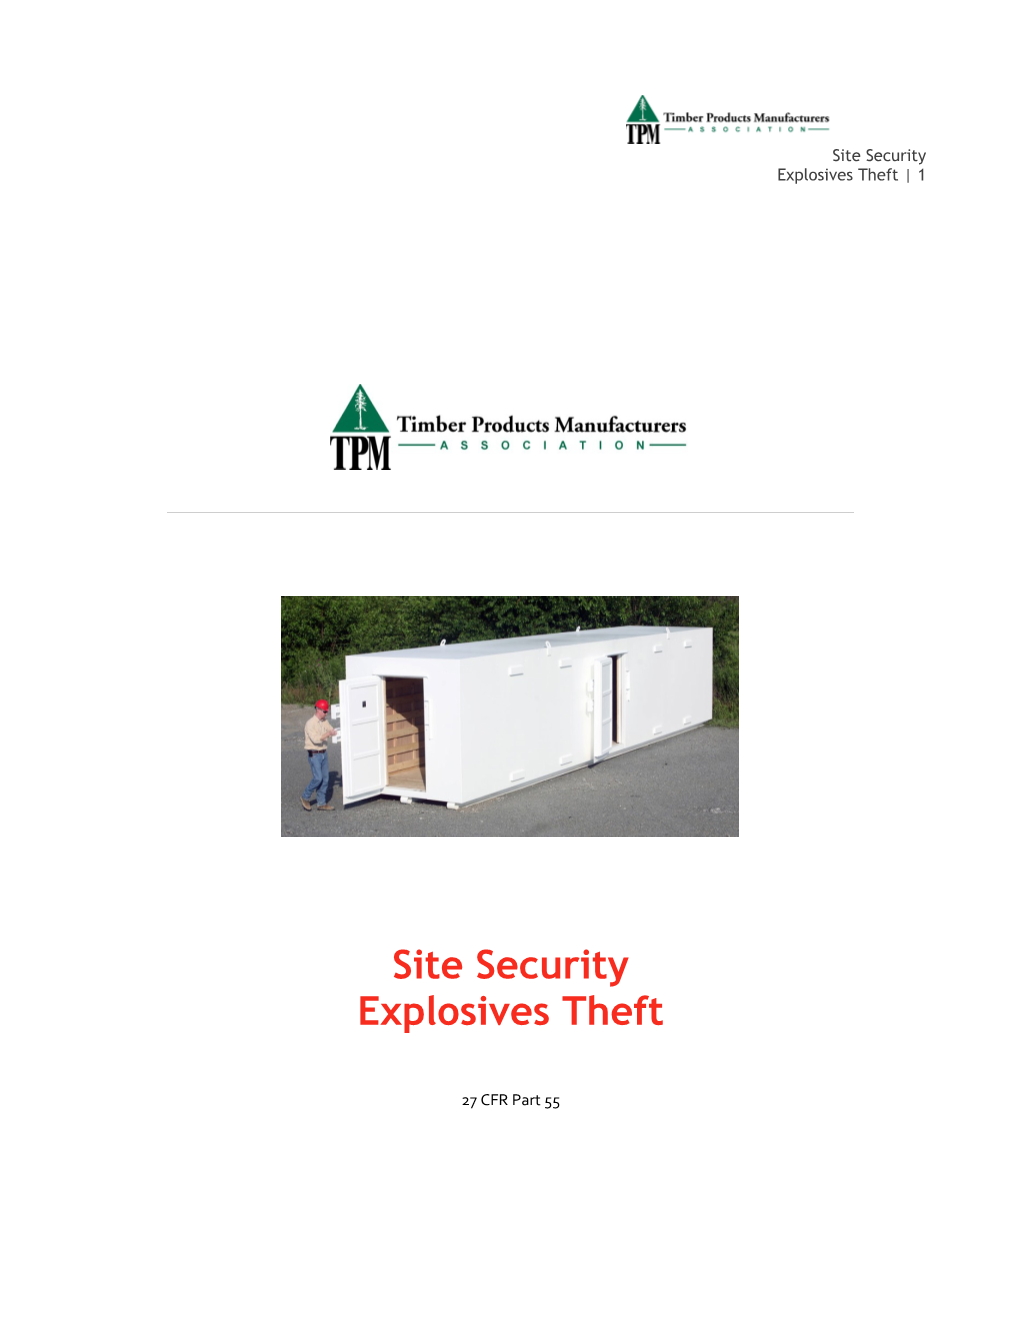 Site Security Explosives Theft